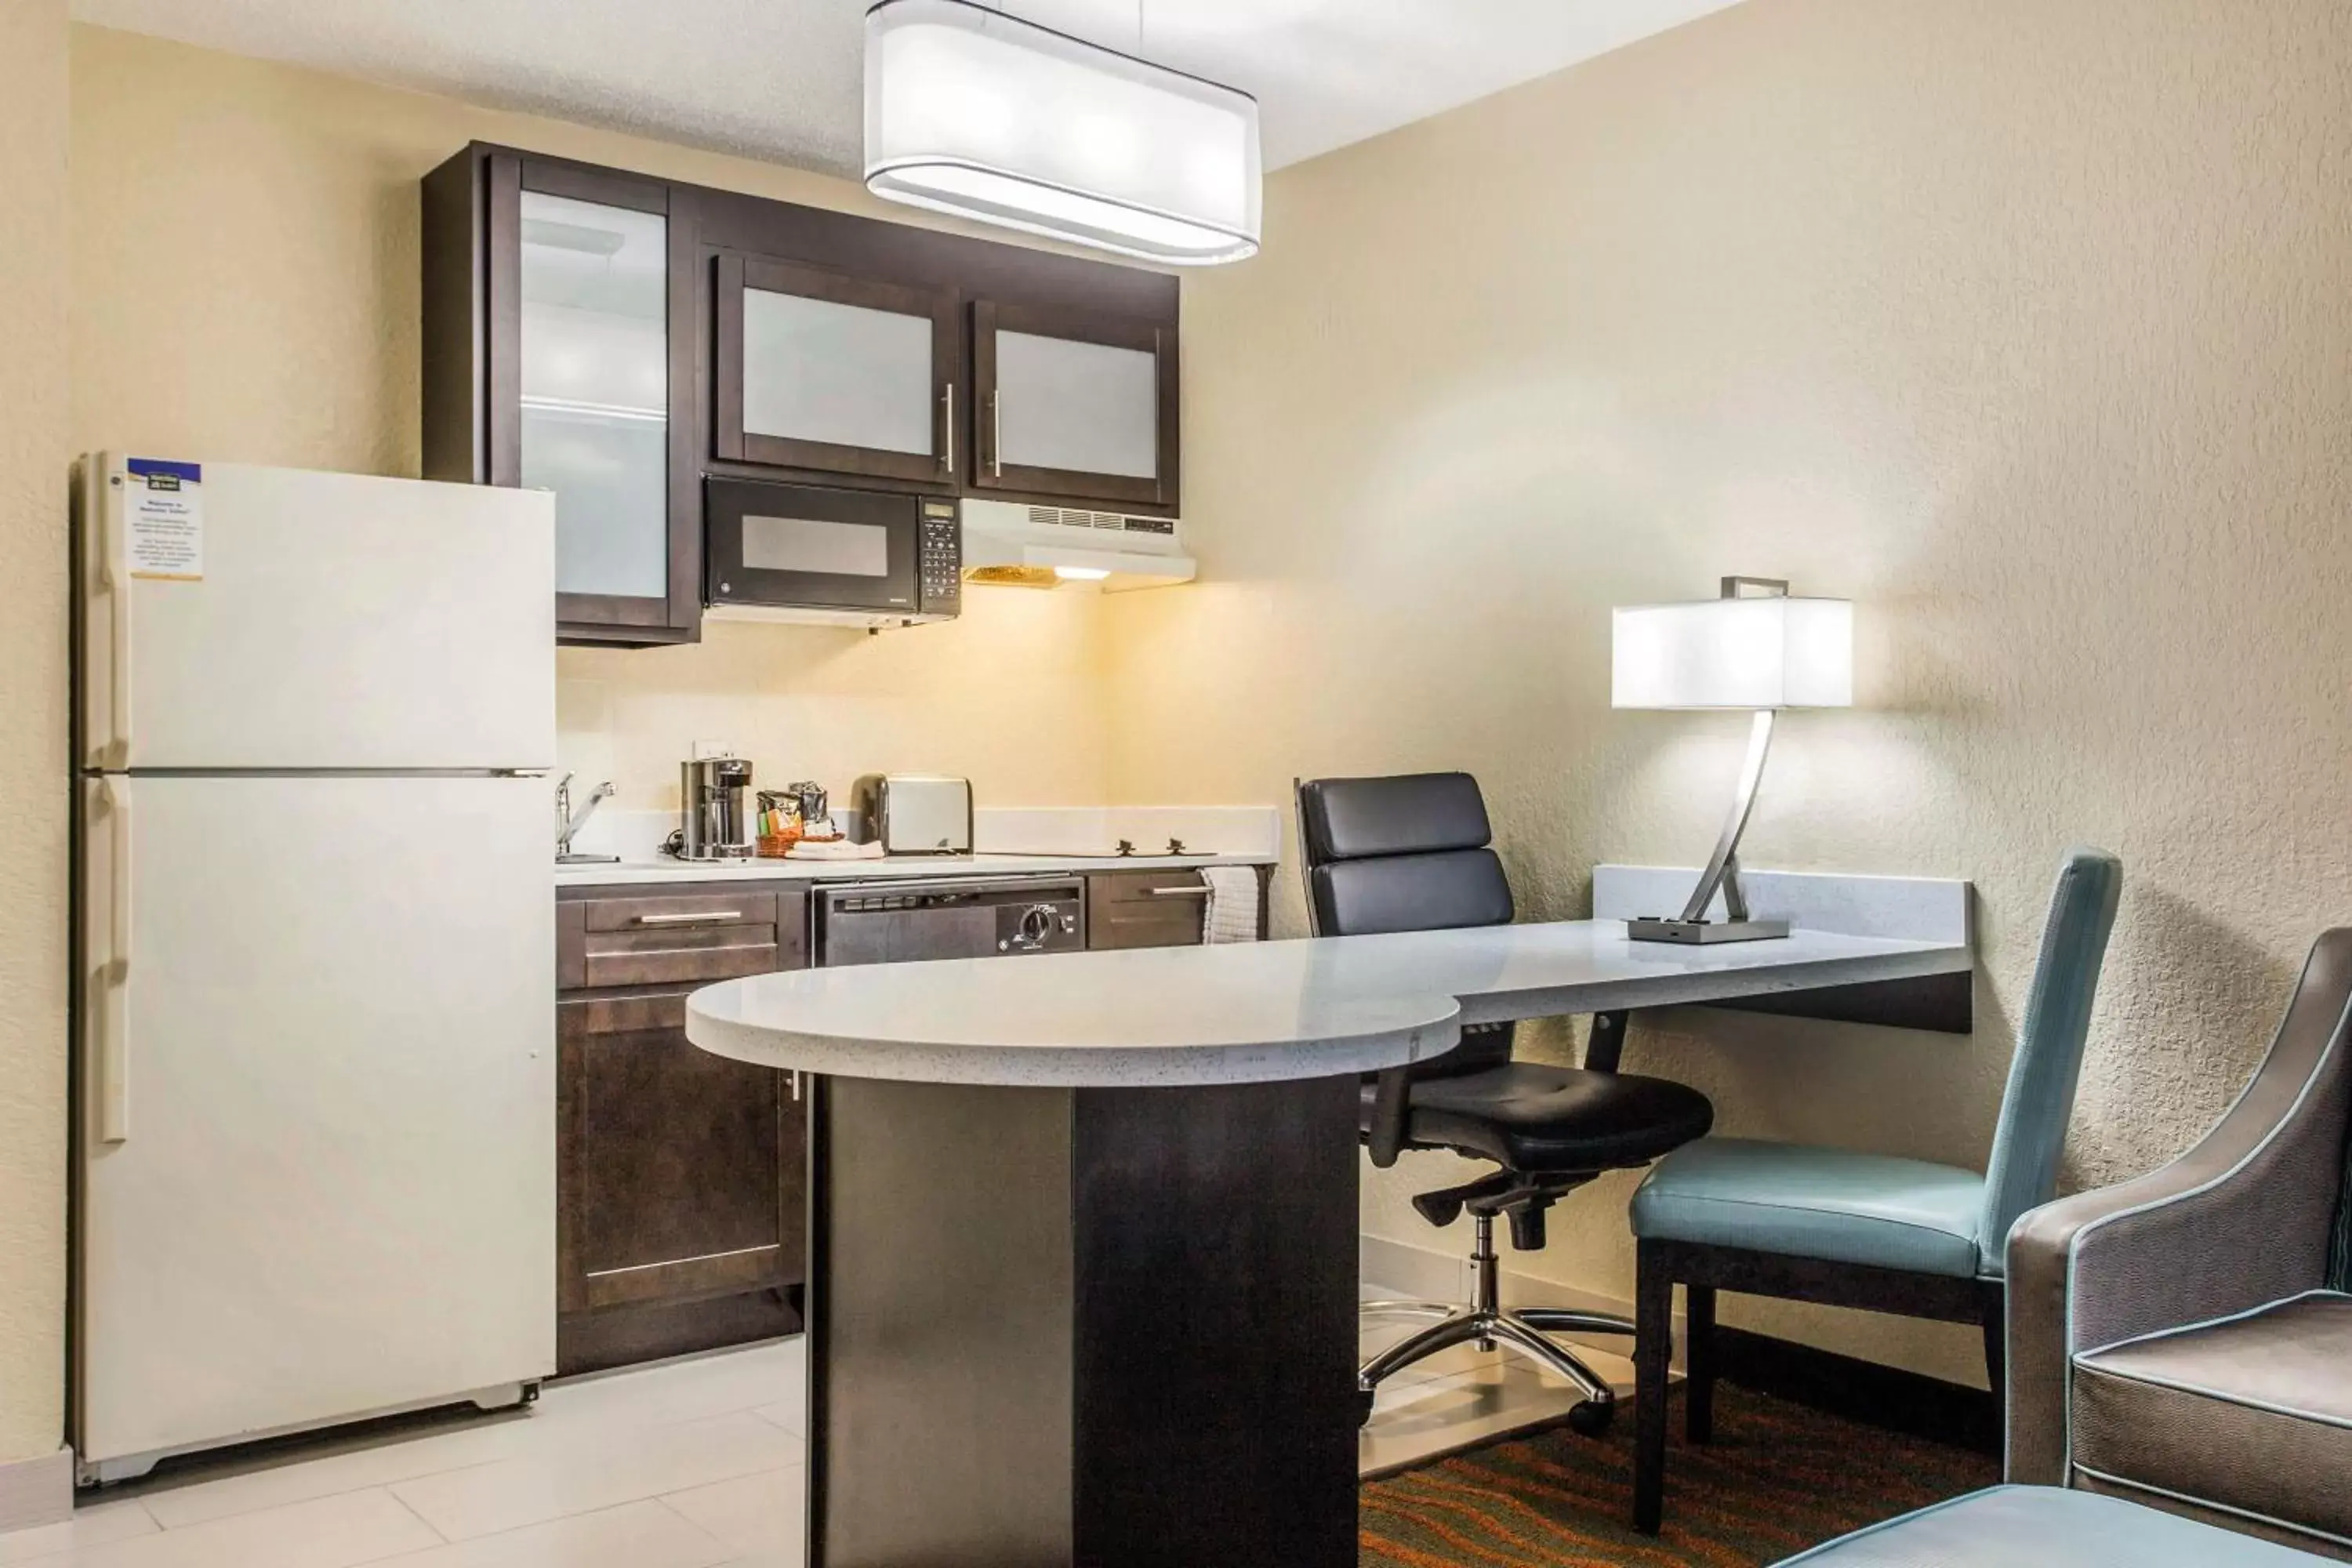 Kitchen or kitchenette in MainStay Suites Greenville Airport